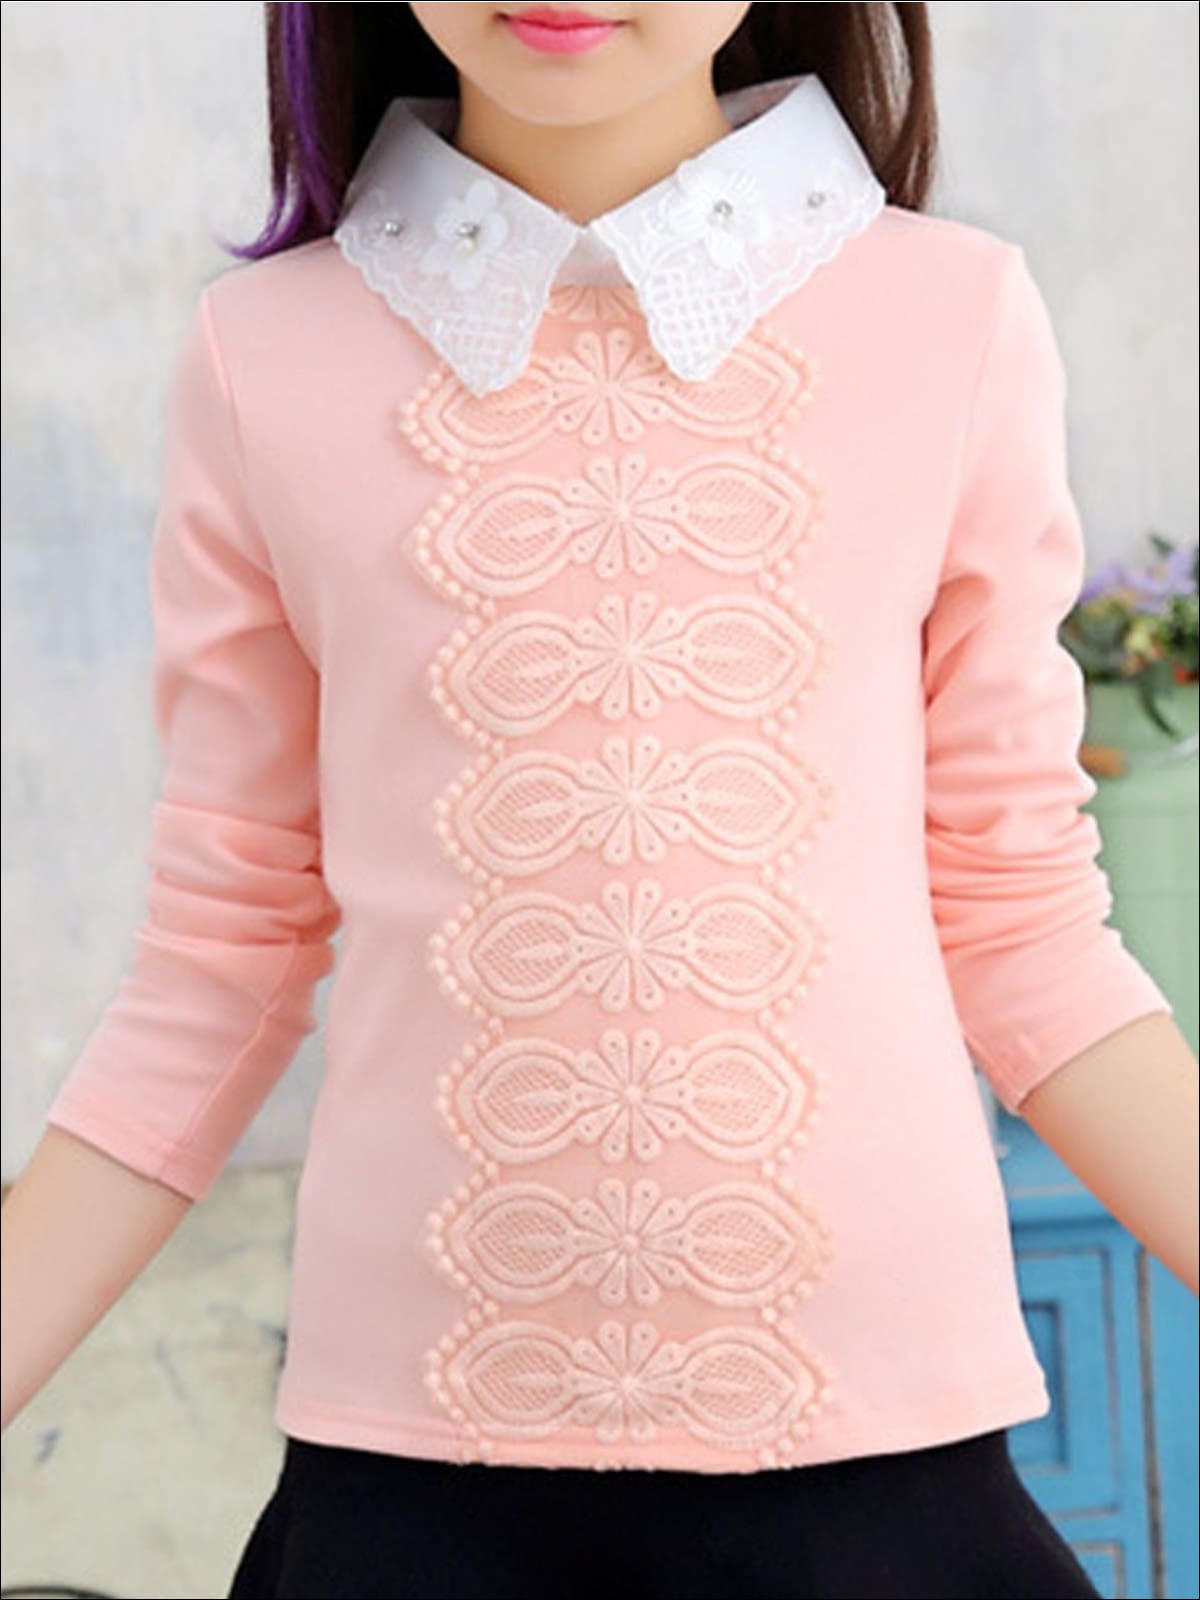 Girls Preppy Floral Lace Applique Long Sleeve Top - Pink / 3T - Girls Fall Top